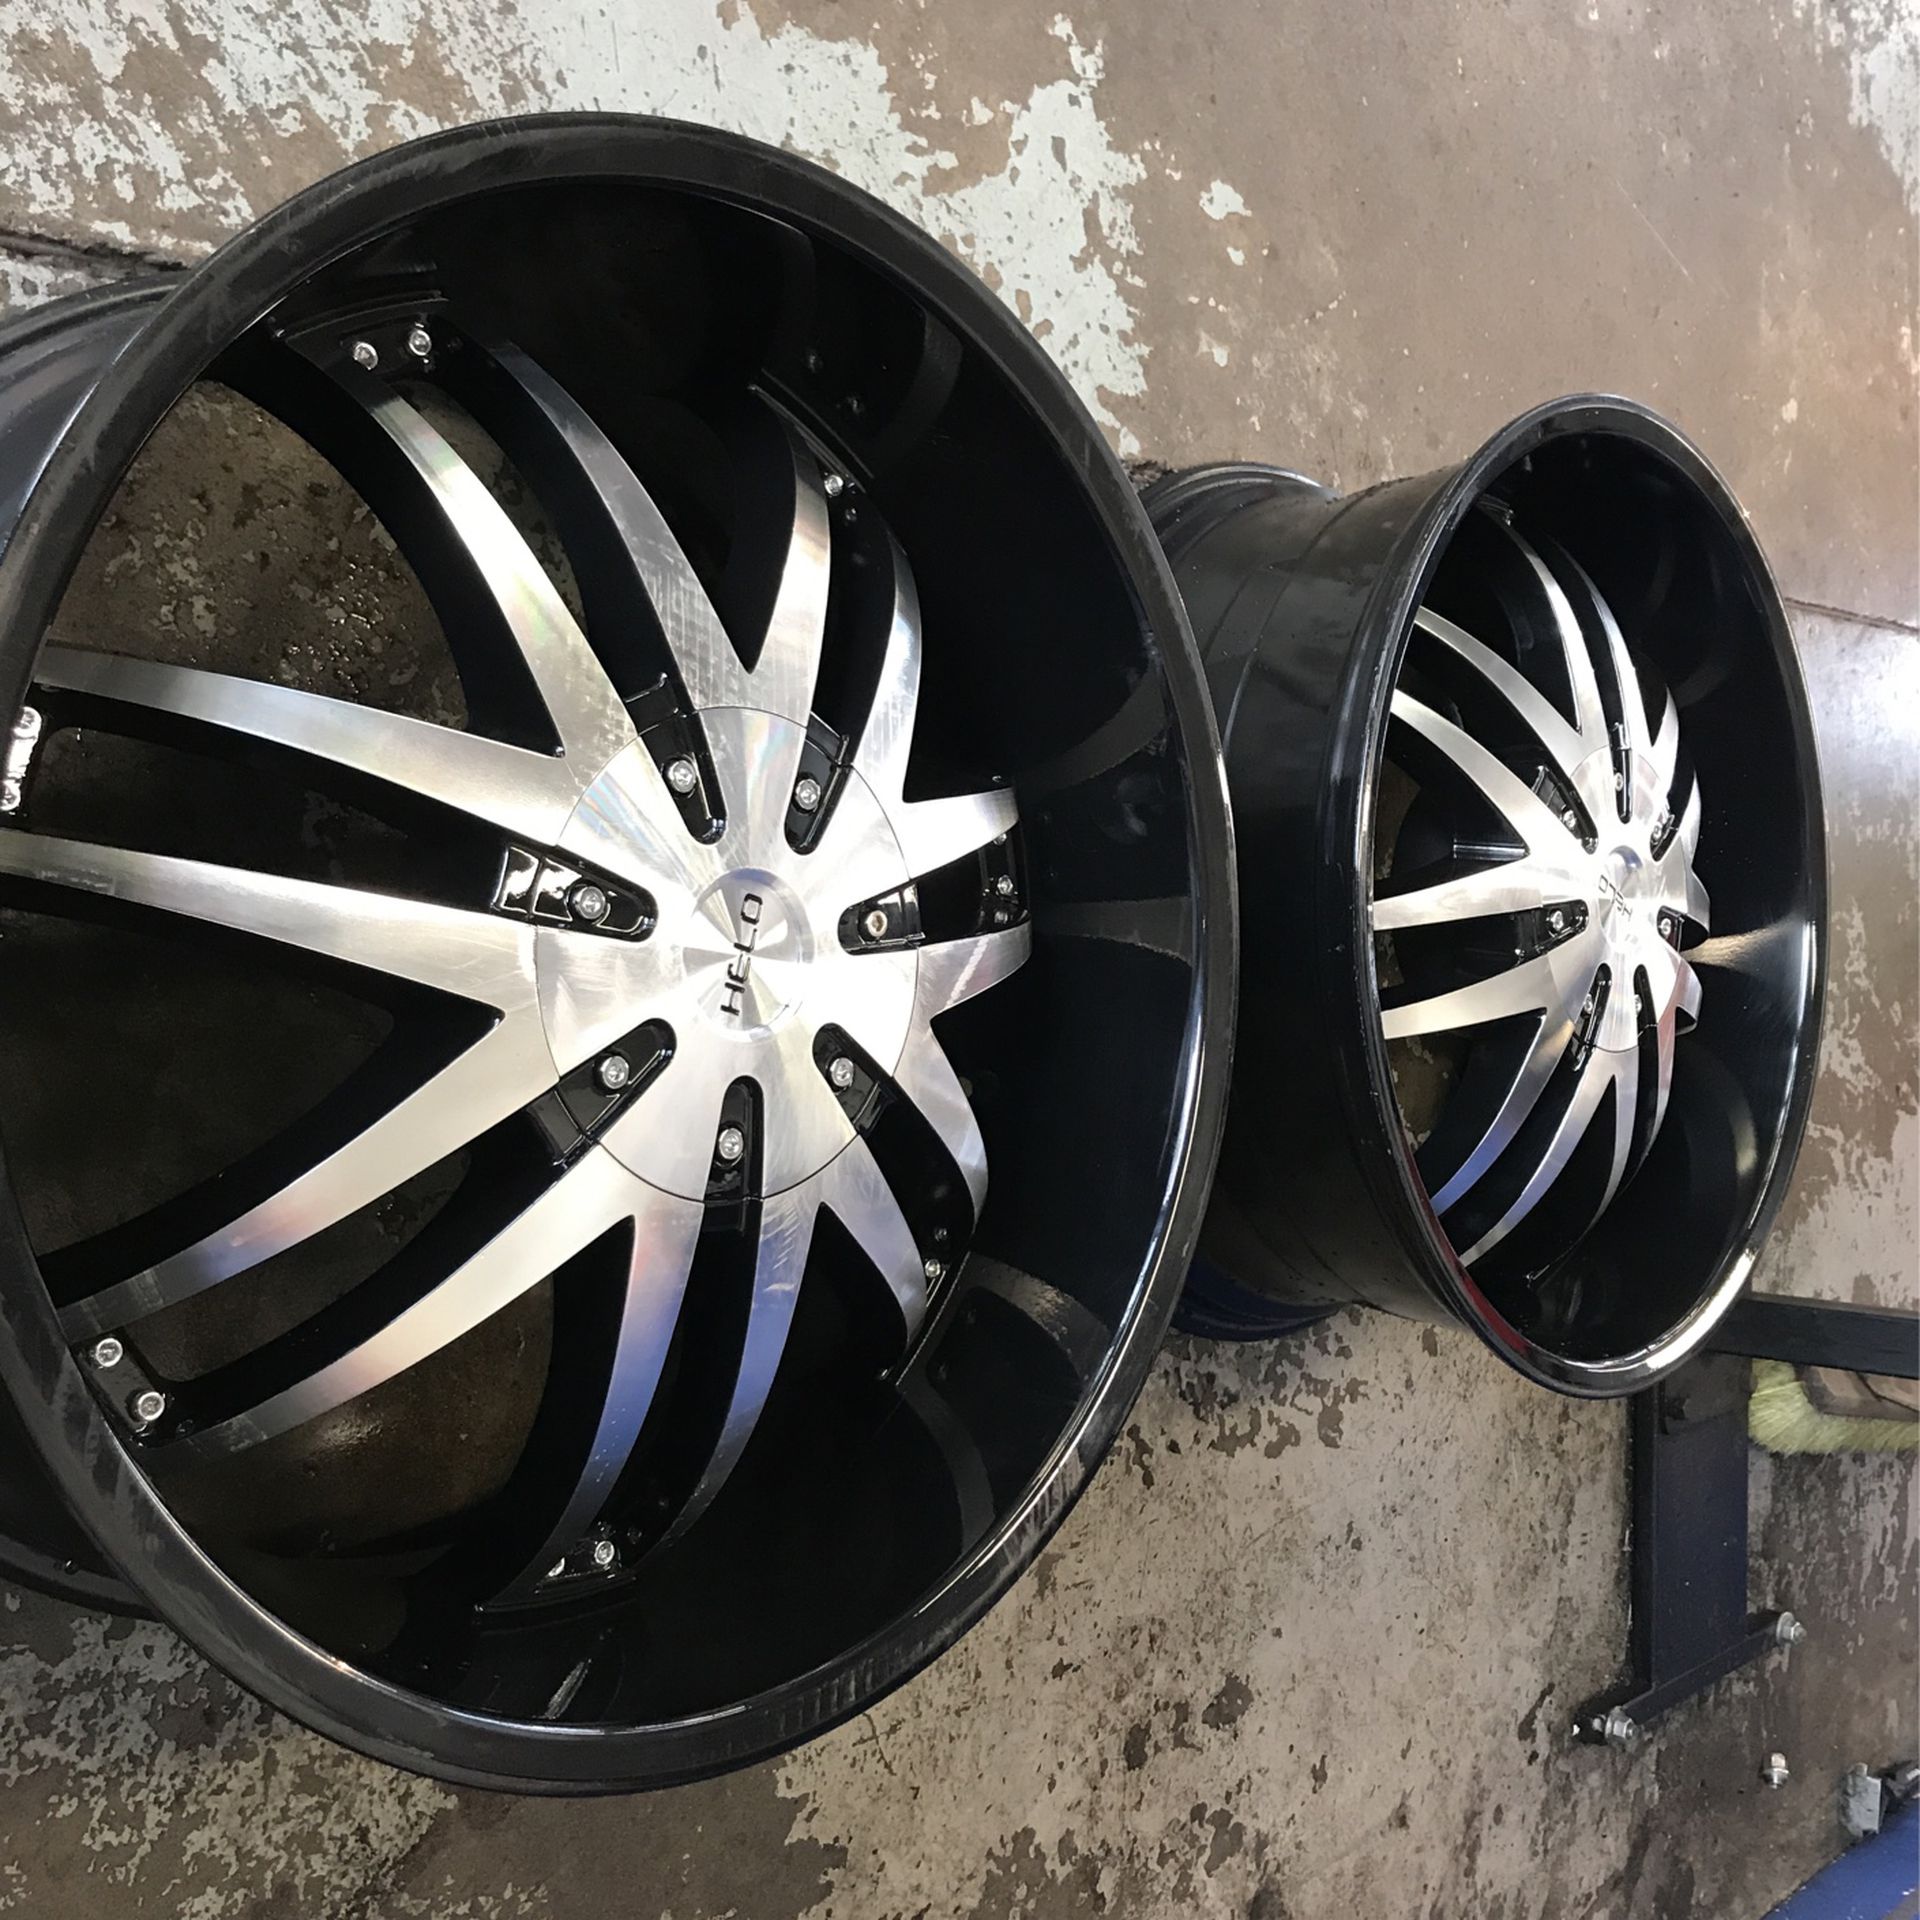 22”x9.5 +15 Helo *Black Friday Deal*